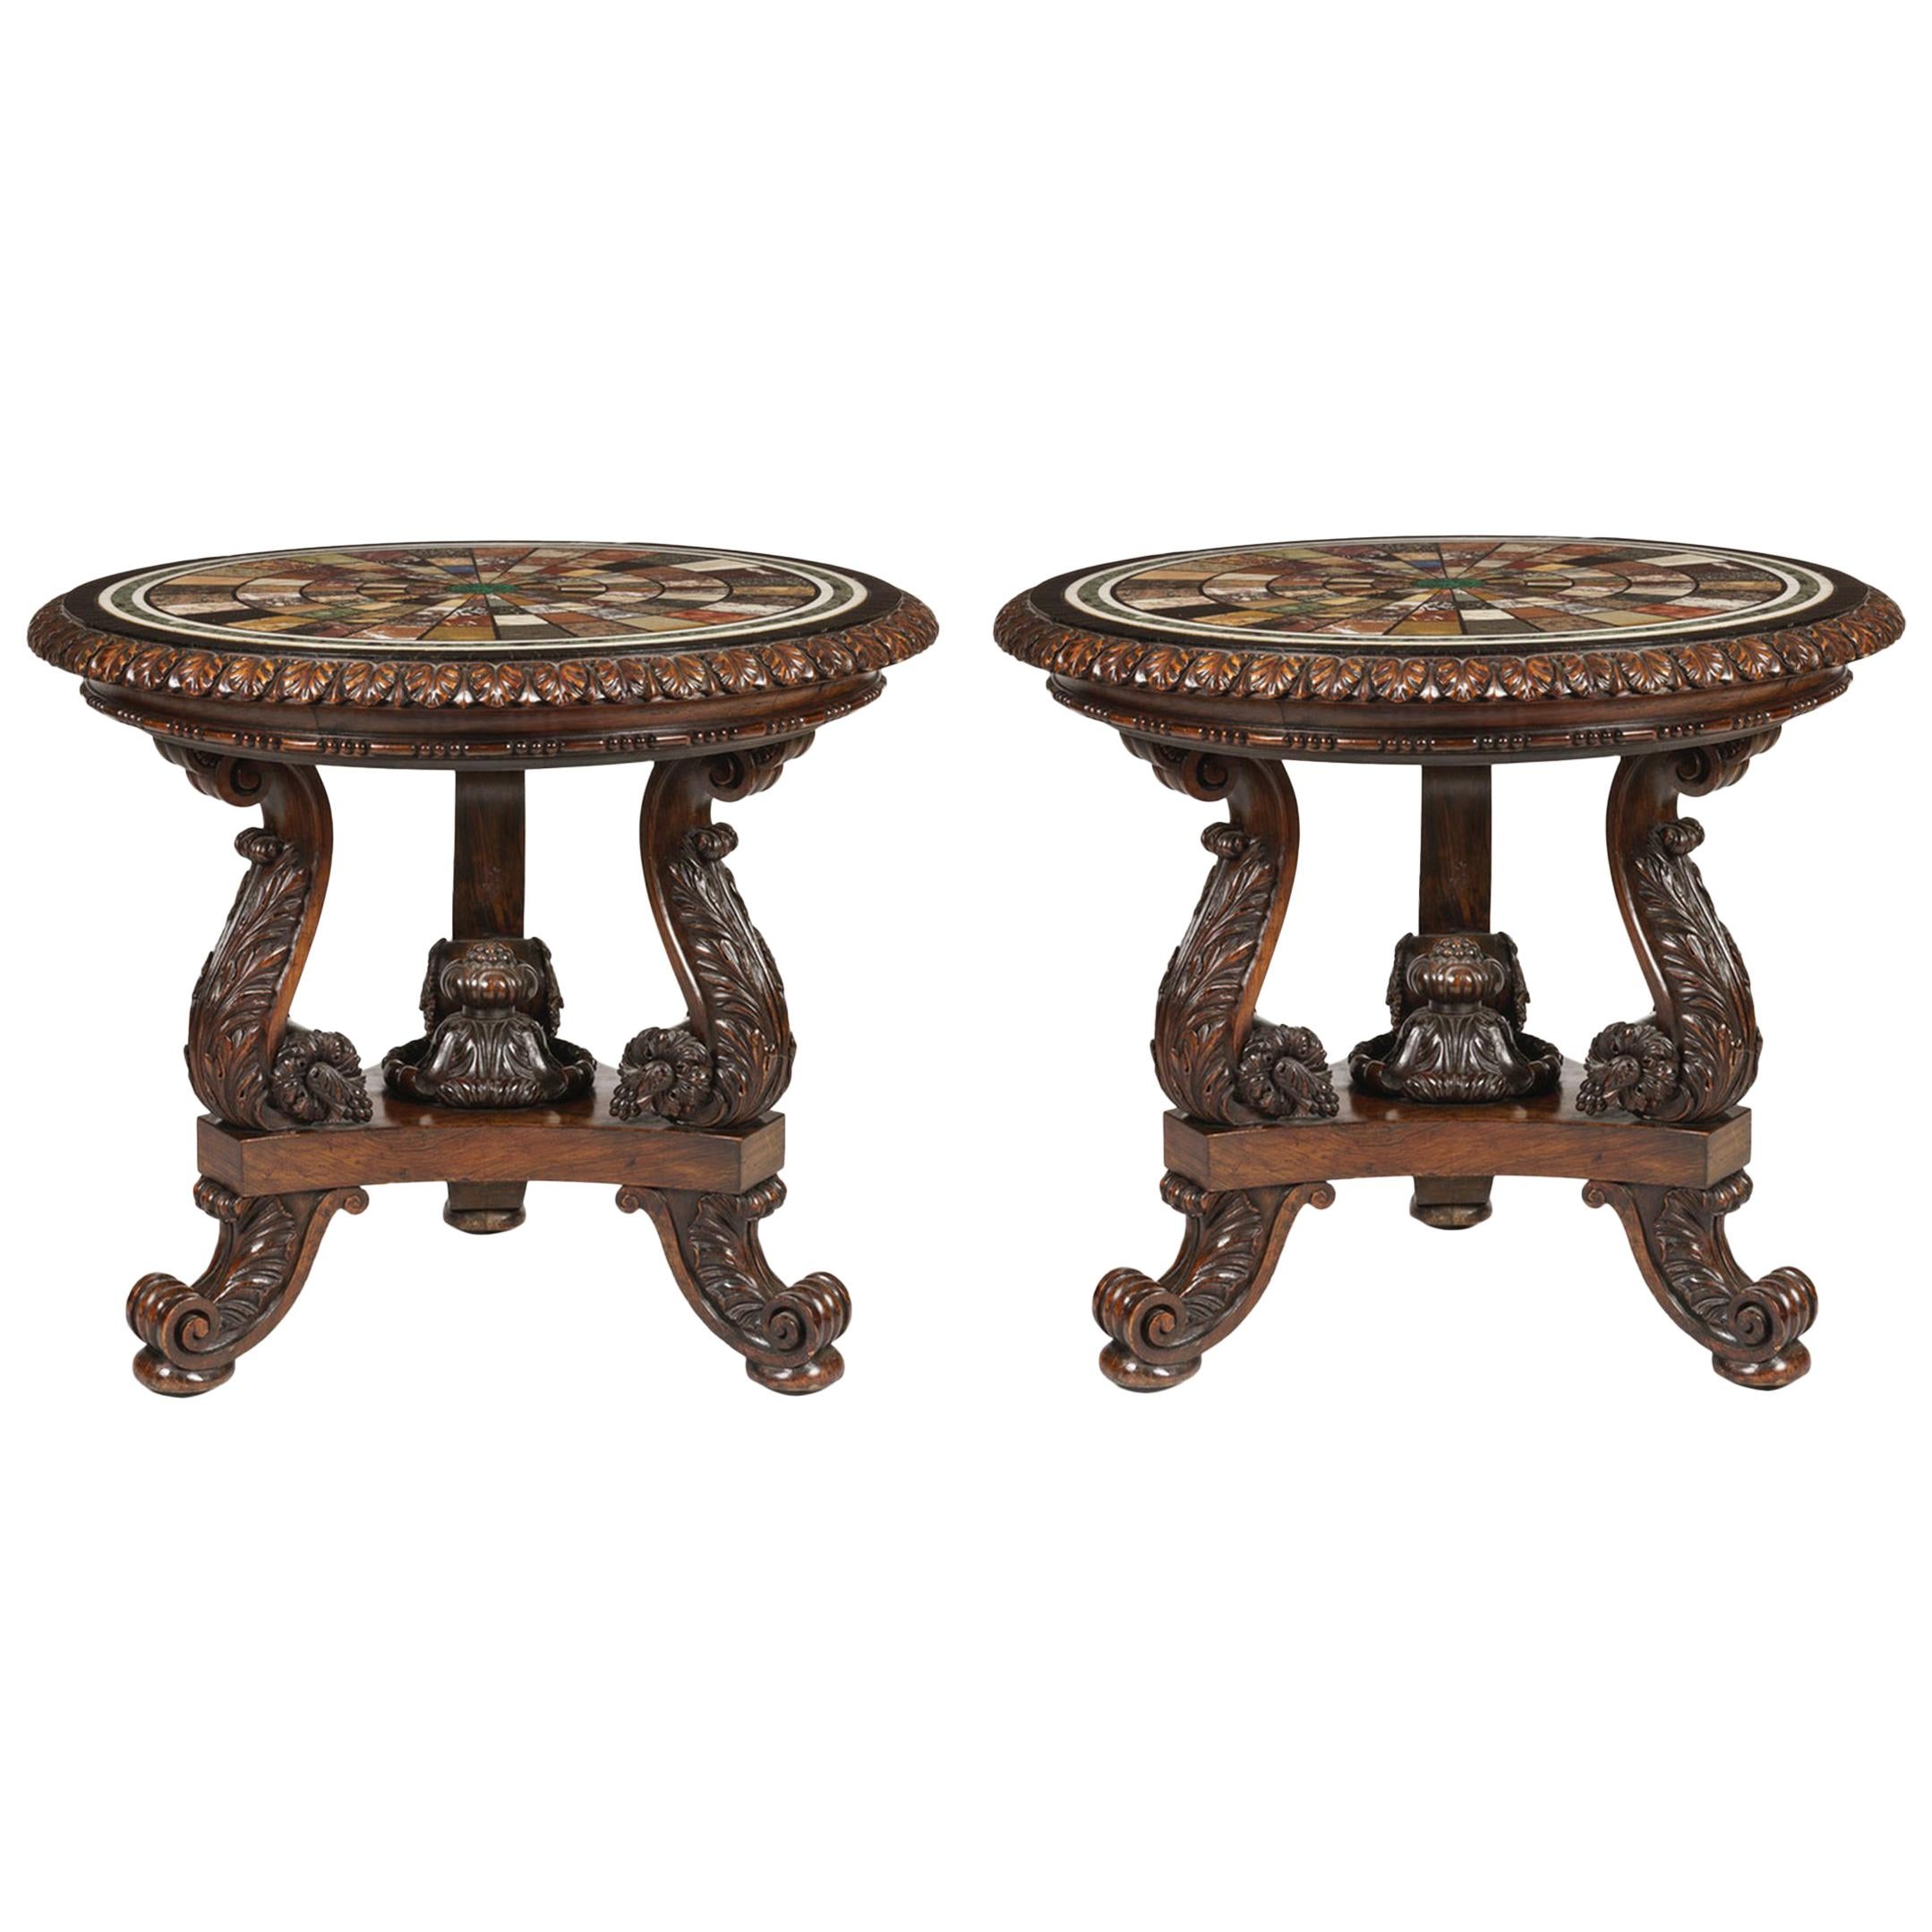 Important Pair of Circular George IV Specimen Marble-Top Tables